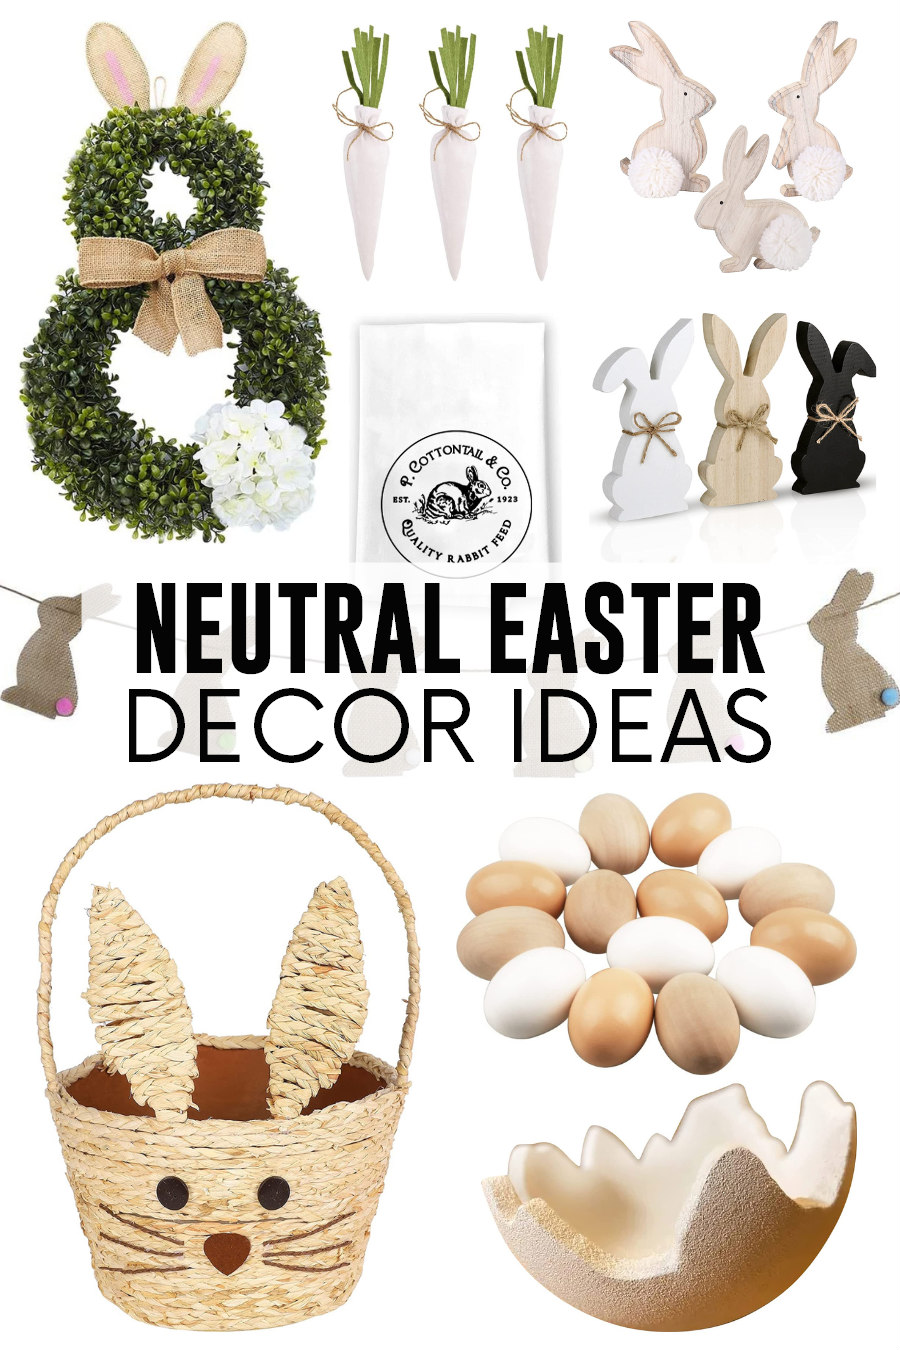 Neutral Easter decor ideas for the home including wreaths, bunnies, eggs, carrots, and baskets.